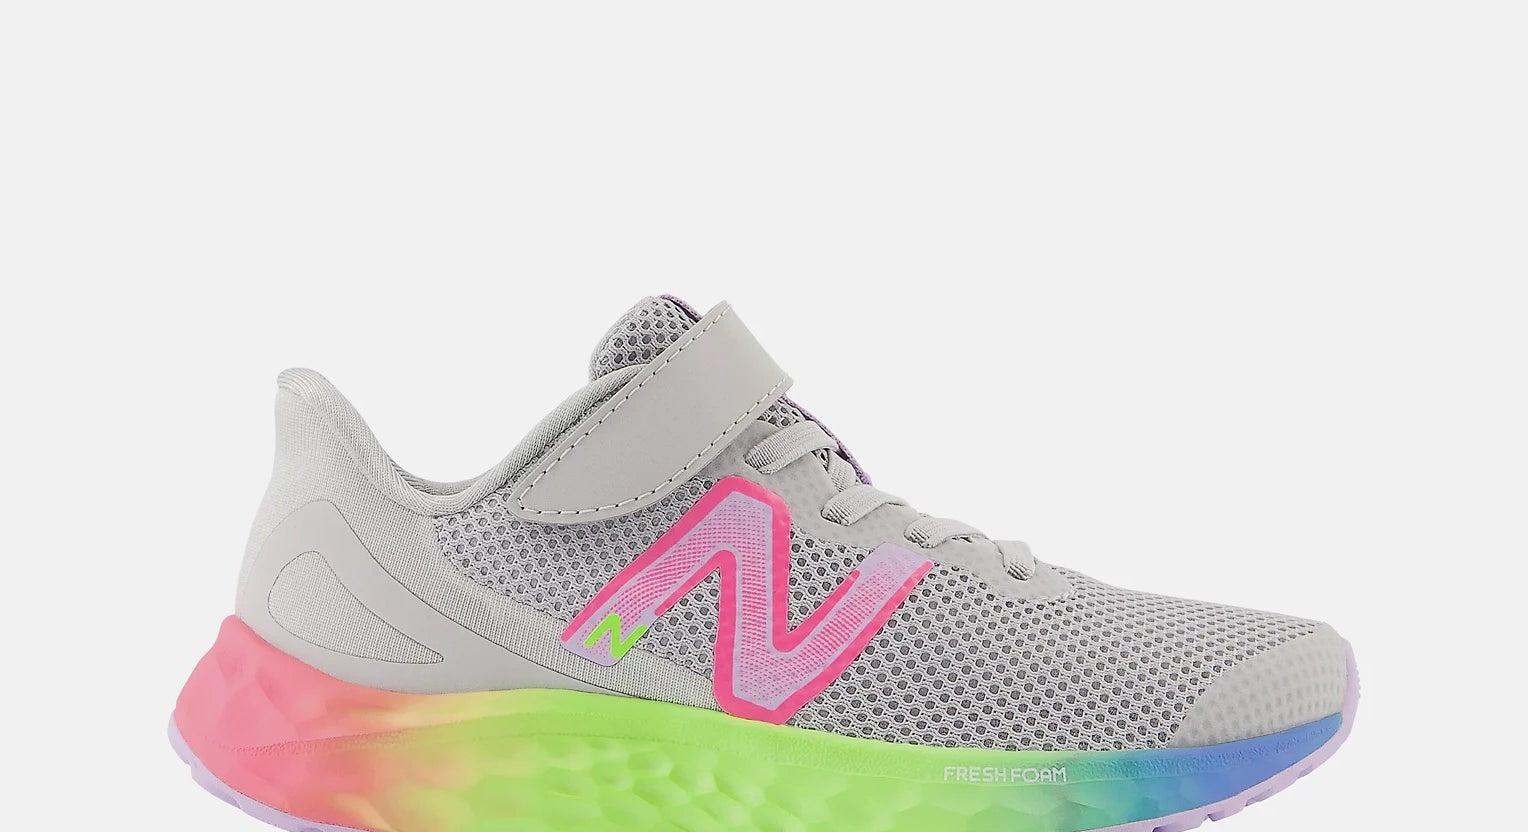 The cyber lilac and neon pink sneaker